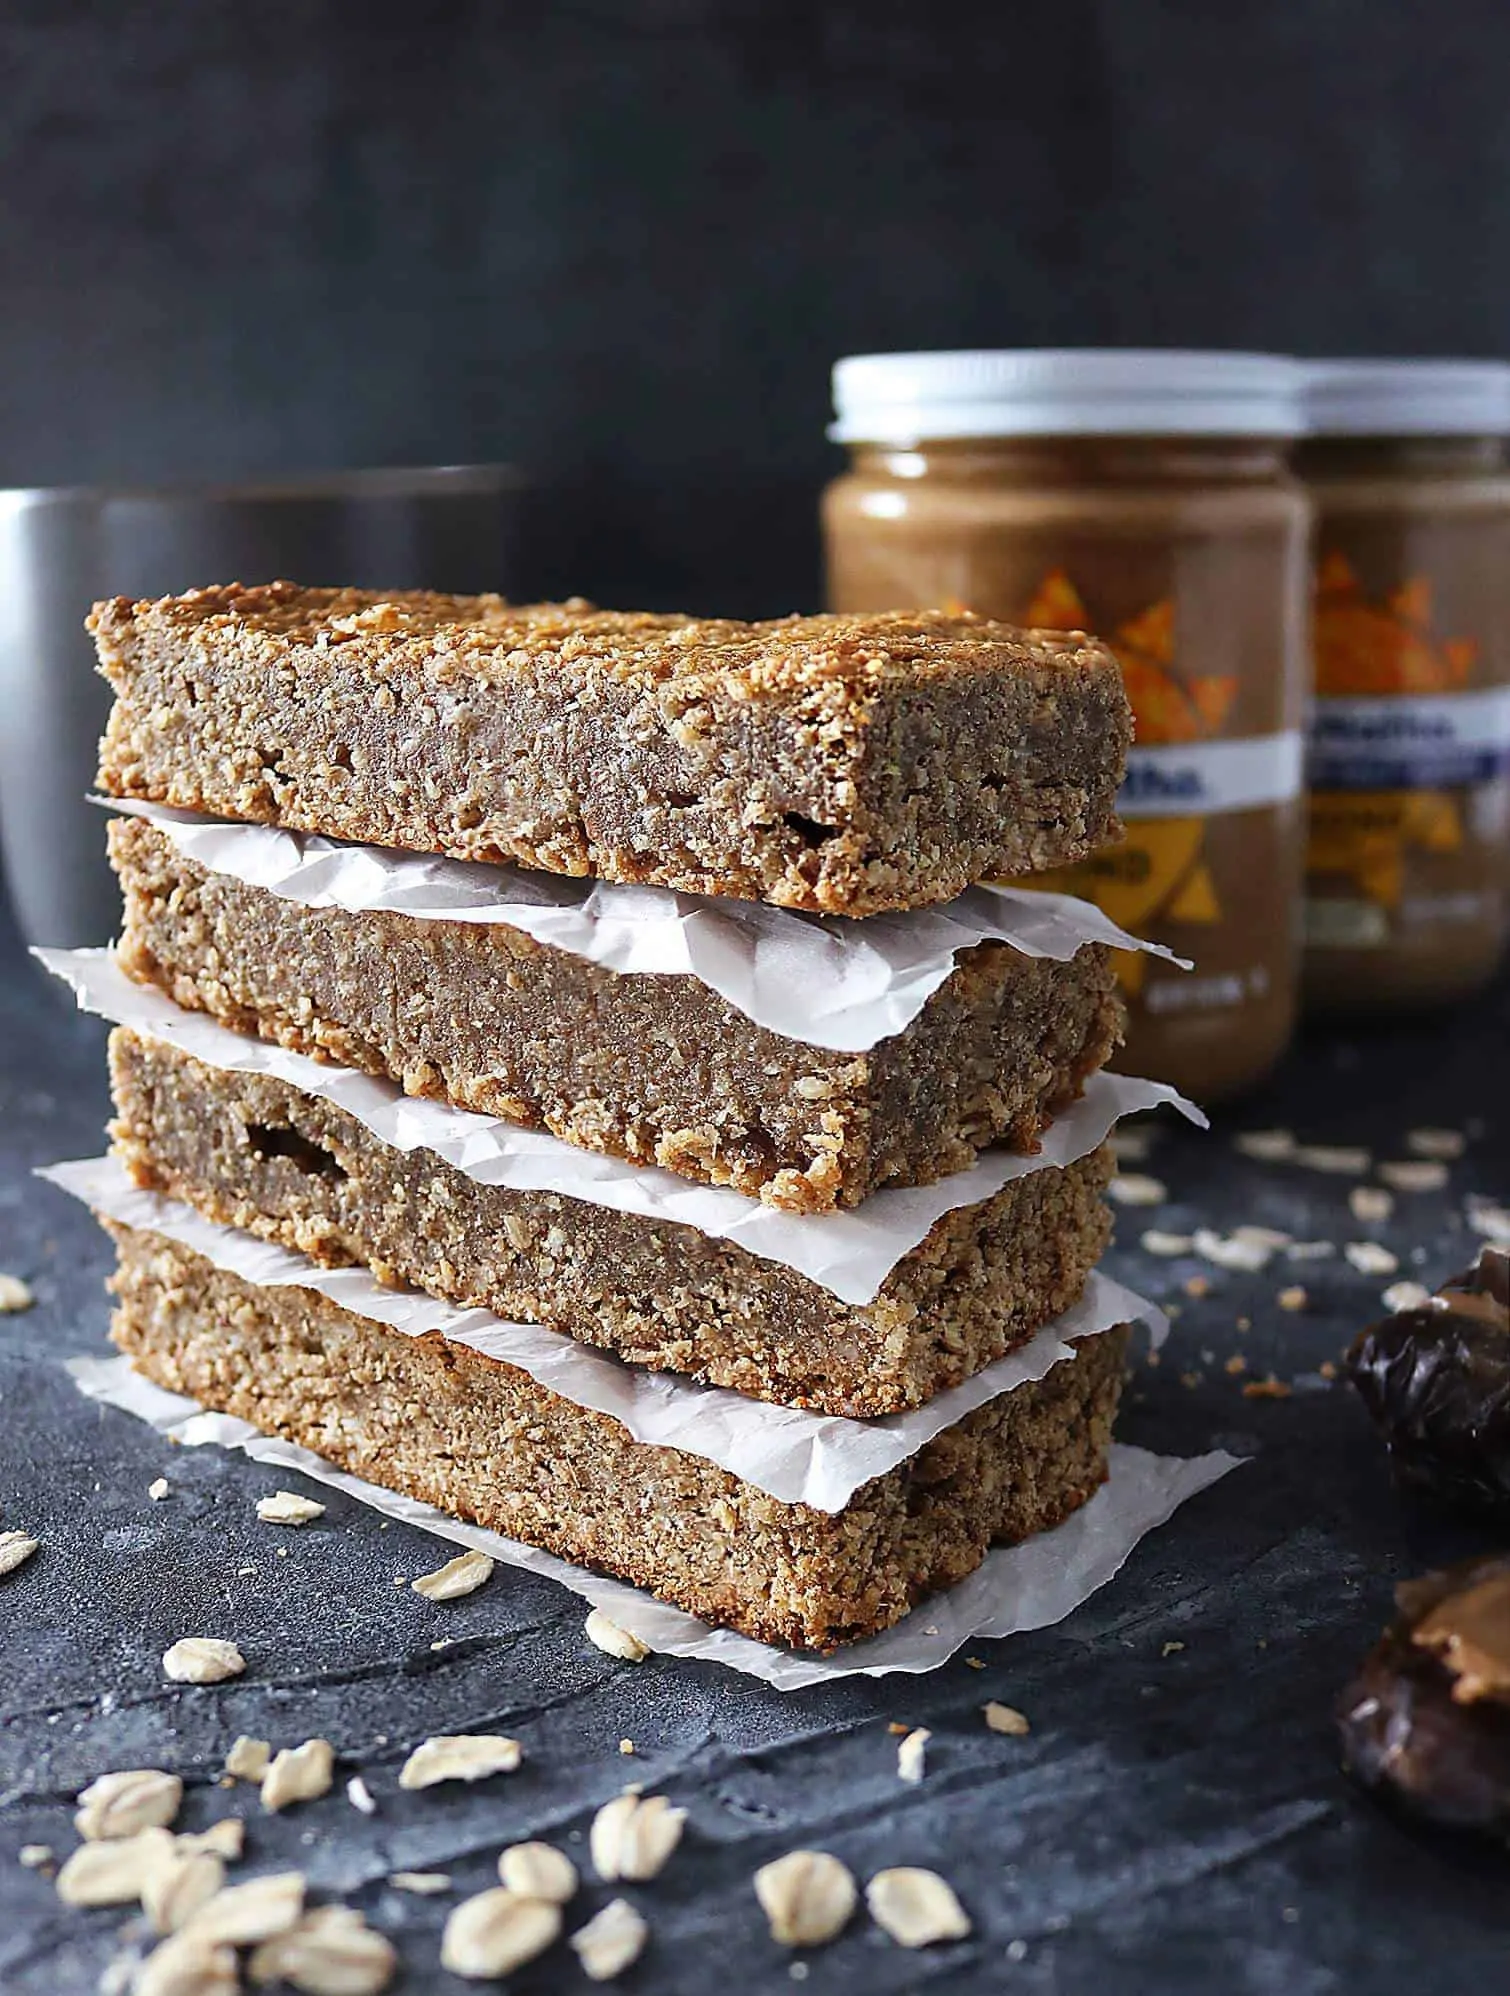 Stack of four Date Almond Bars with almond butter jars in the background.